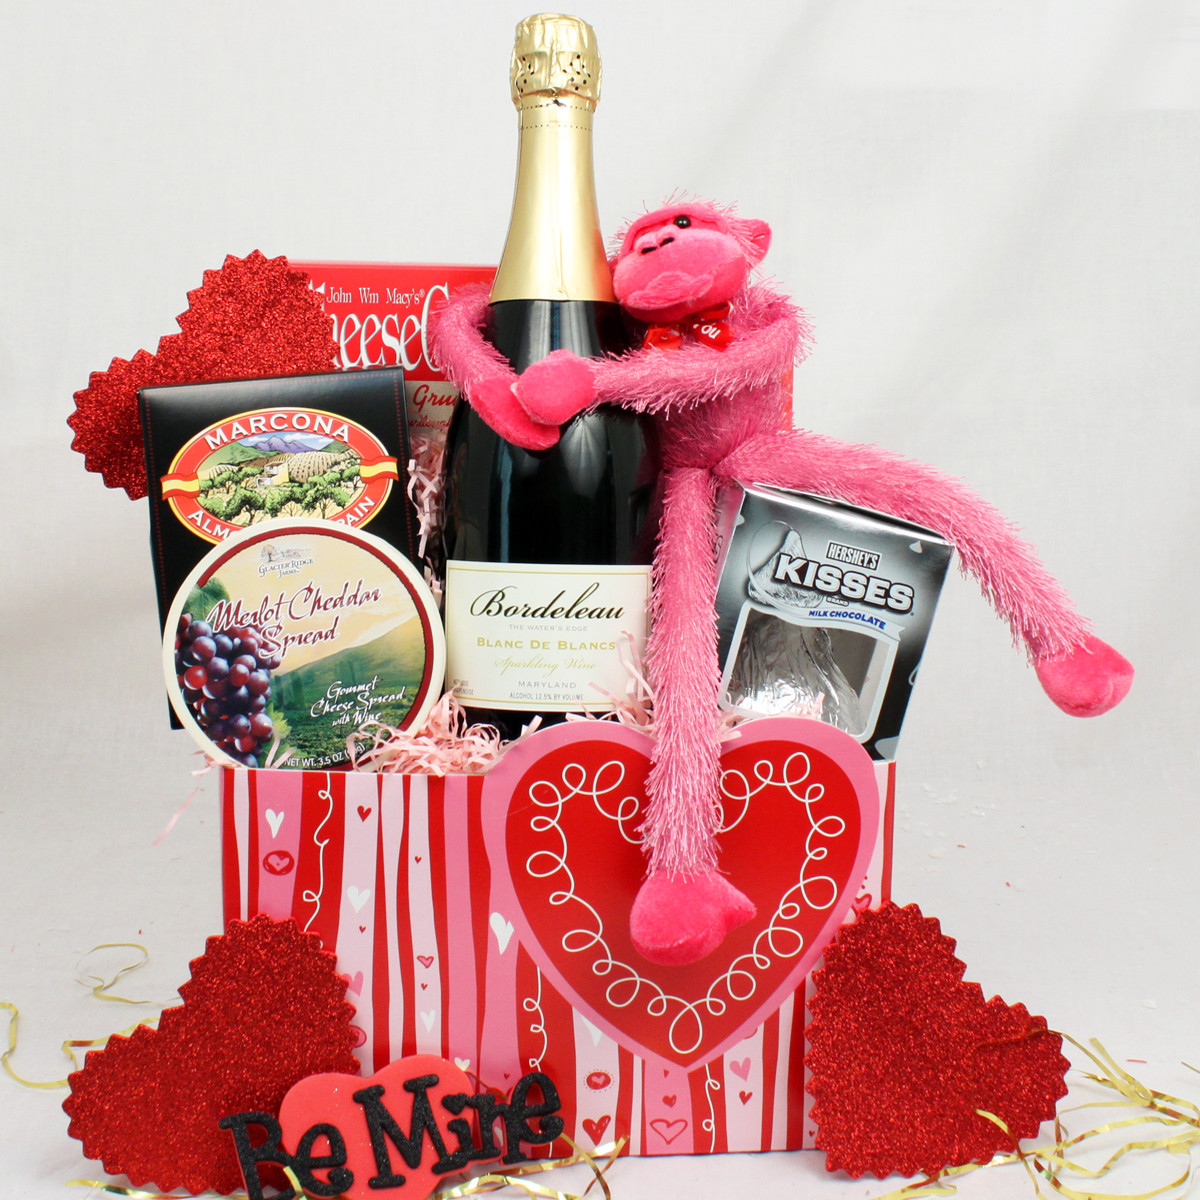 Creative Valentines Day Ideas for Her New Creative and thoughtful Valentine’s Day Gifts for Her